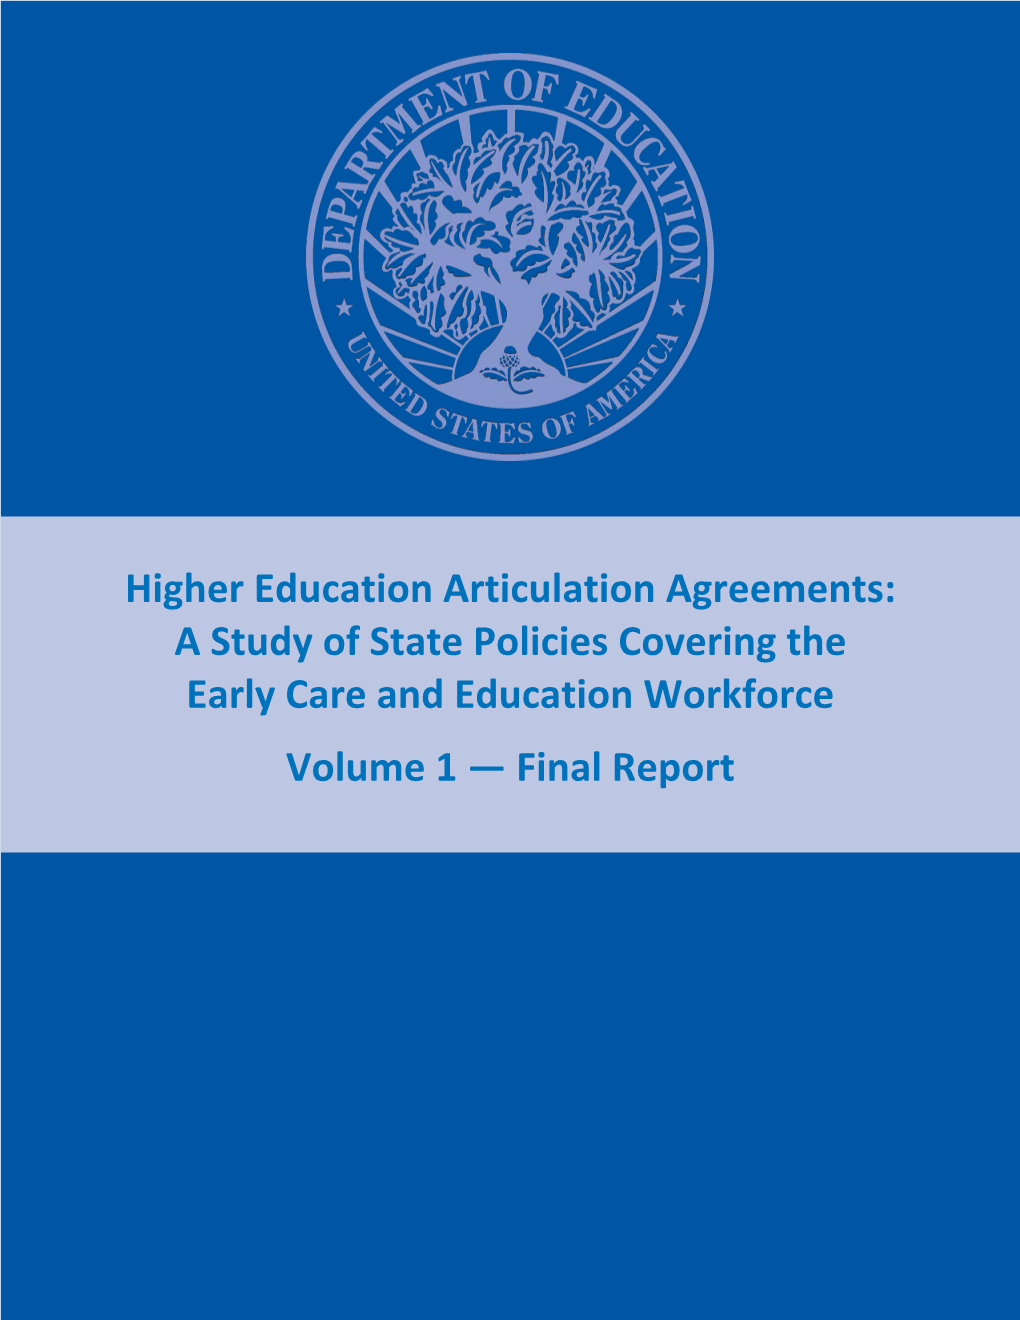 Higher Education Articulation Agreements: a Study of State Policies Covering the Early Care and Education Workforce Volume 1 — Final Report